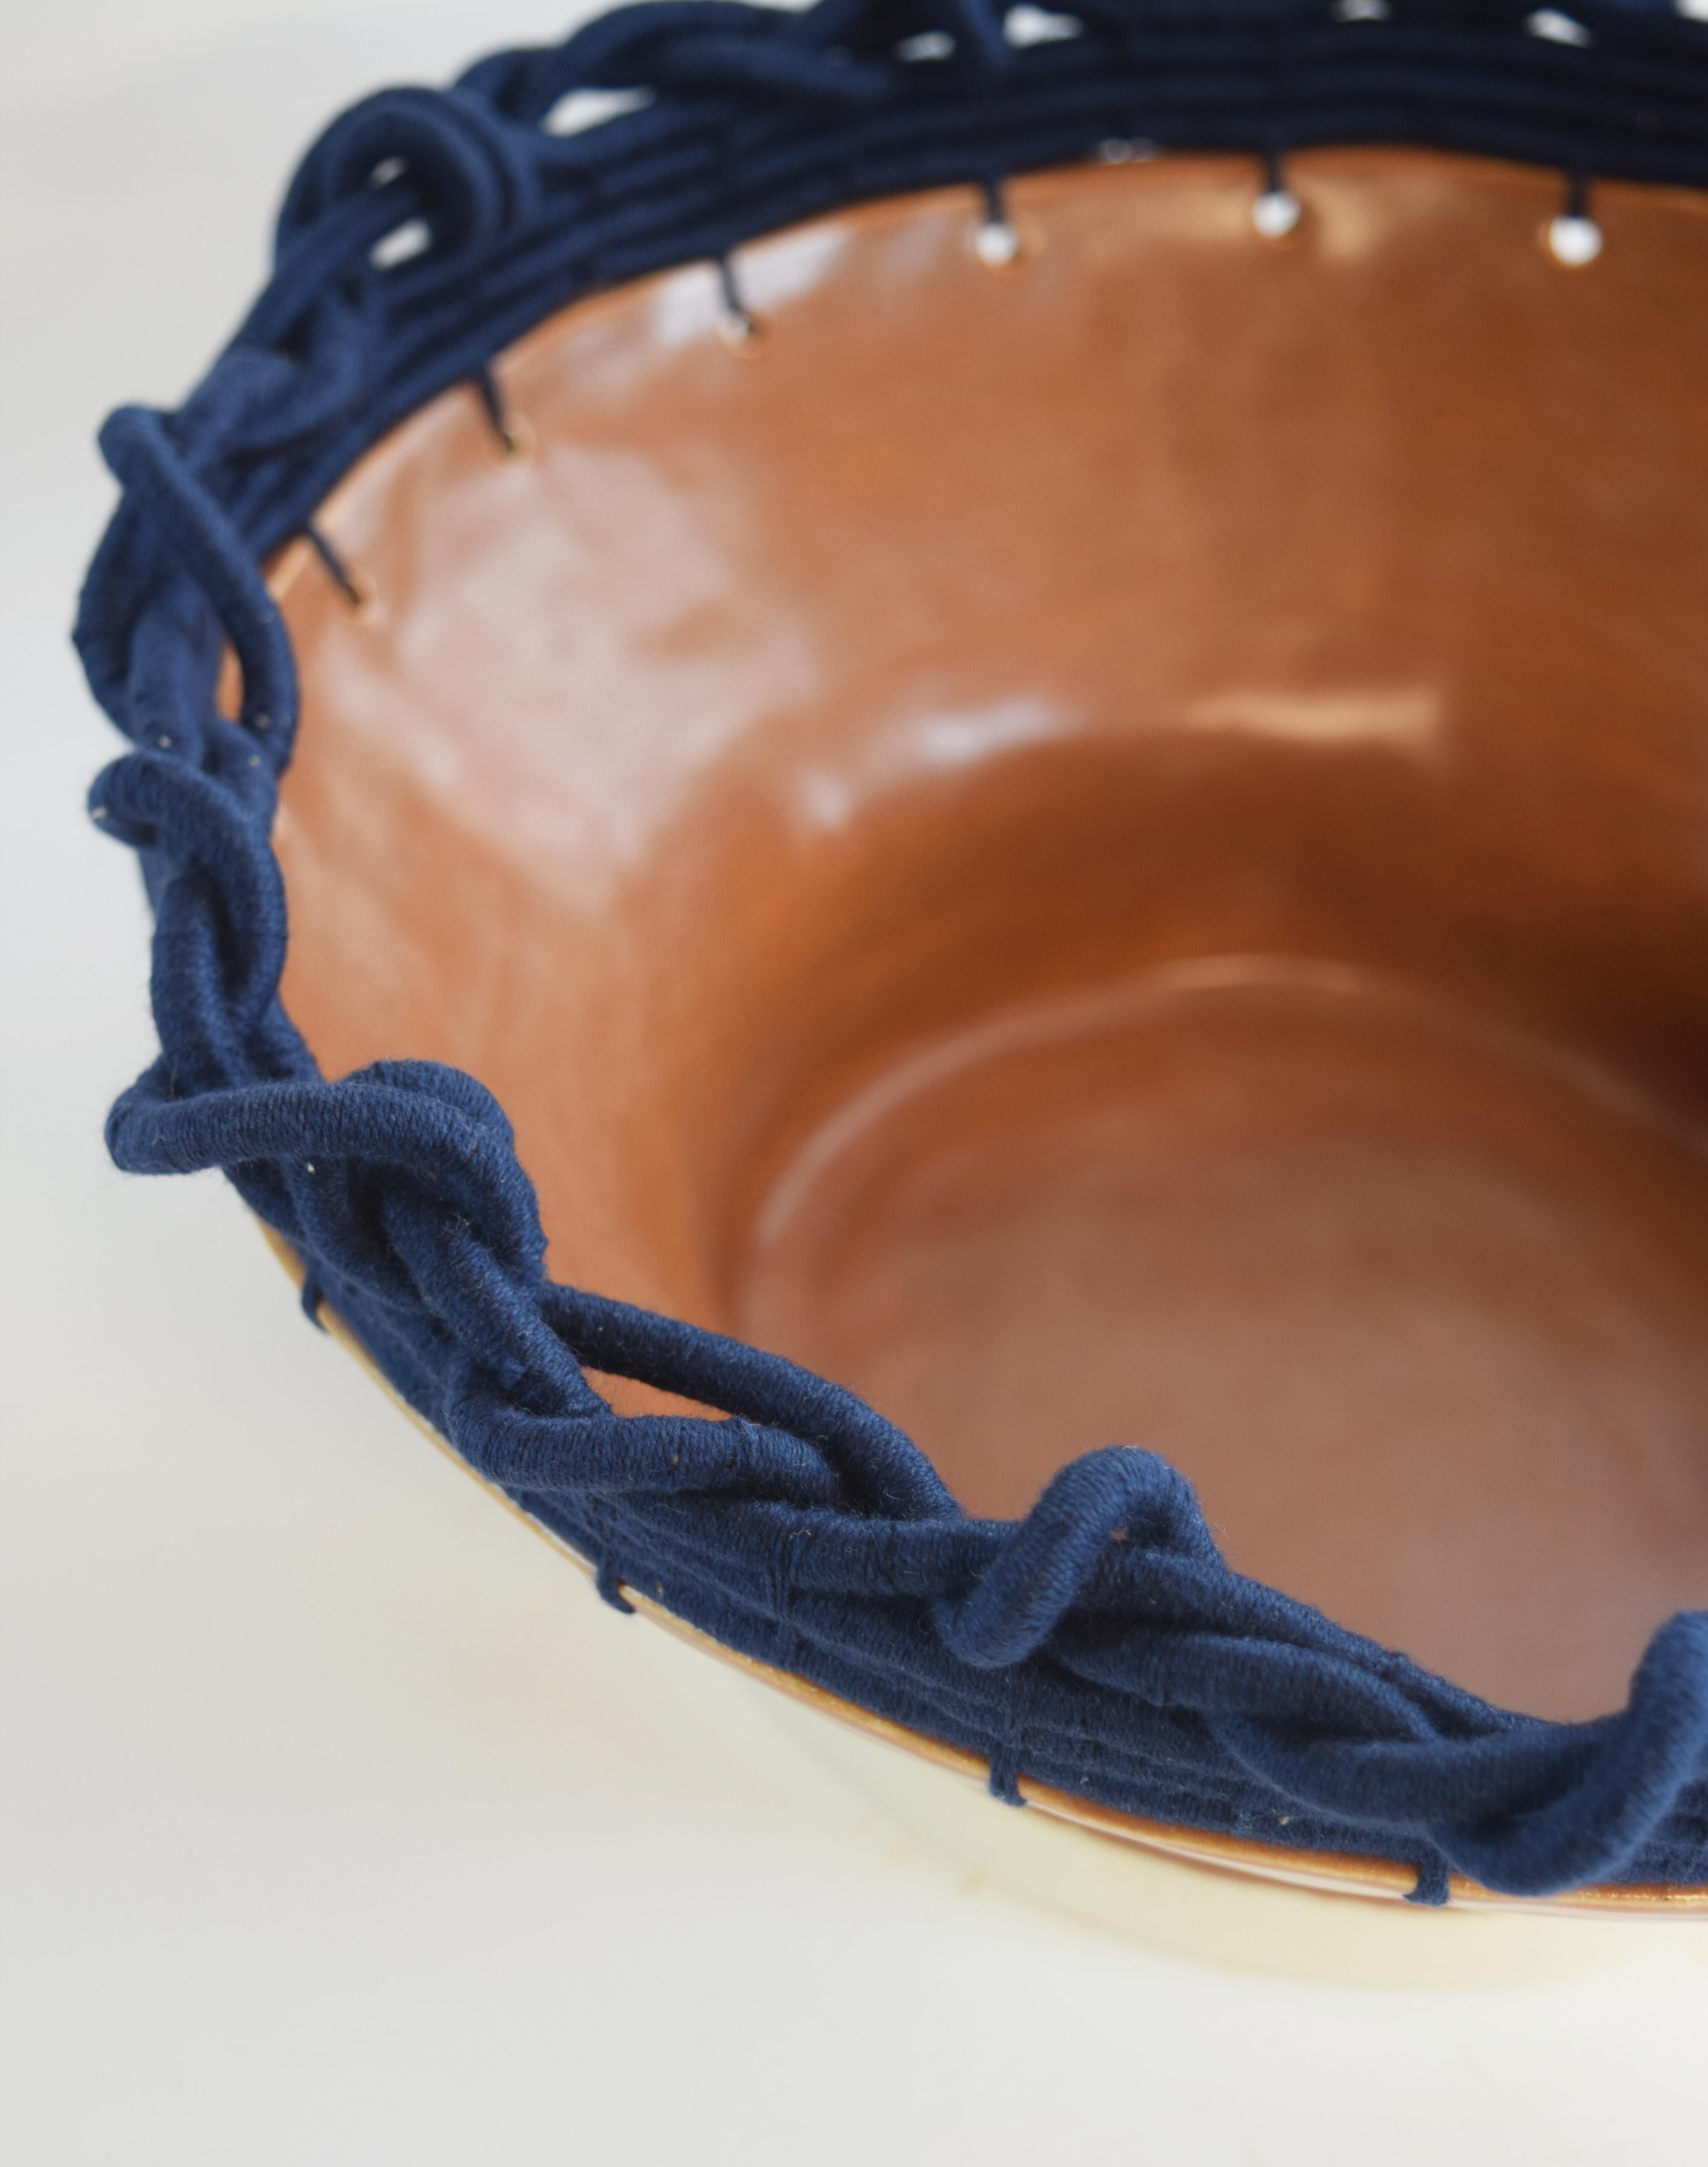 Organic Modern One of a Kind Handmade Ceramic Bowl #803, Brown Glaze & Woven Navy Blue Cotton For Sale